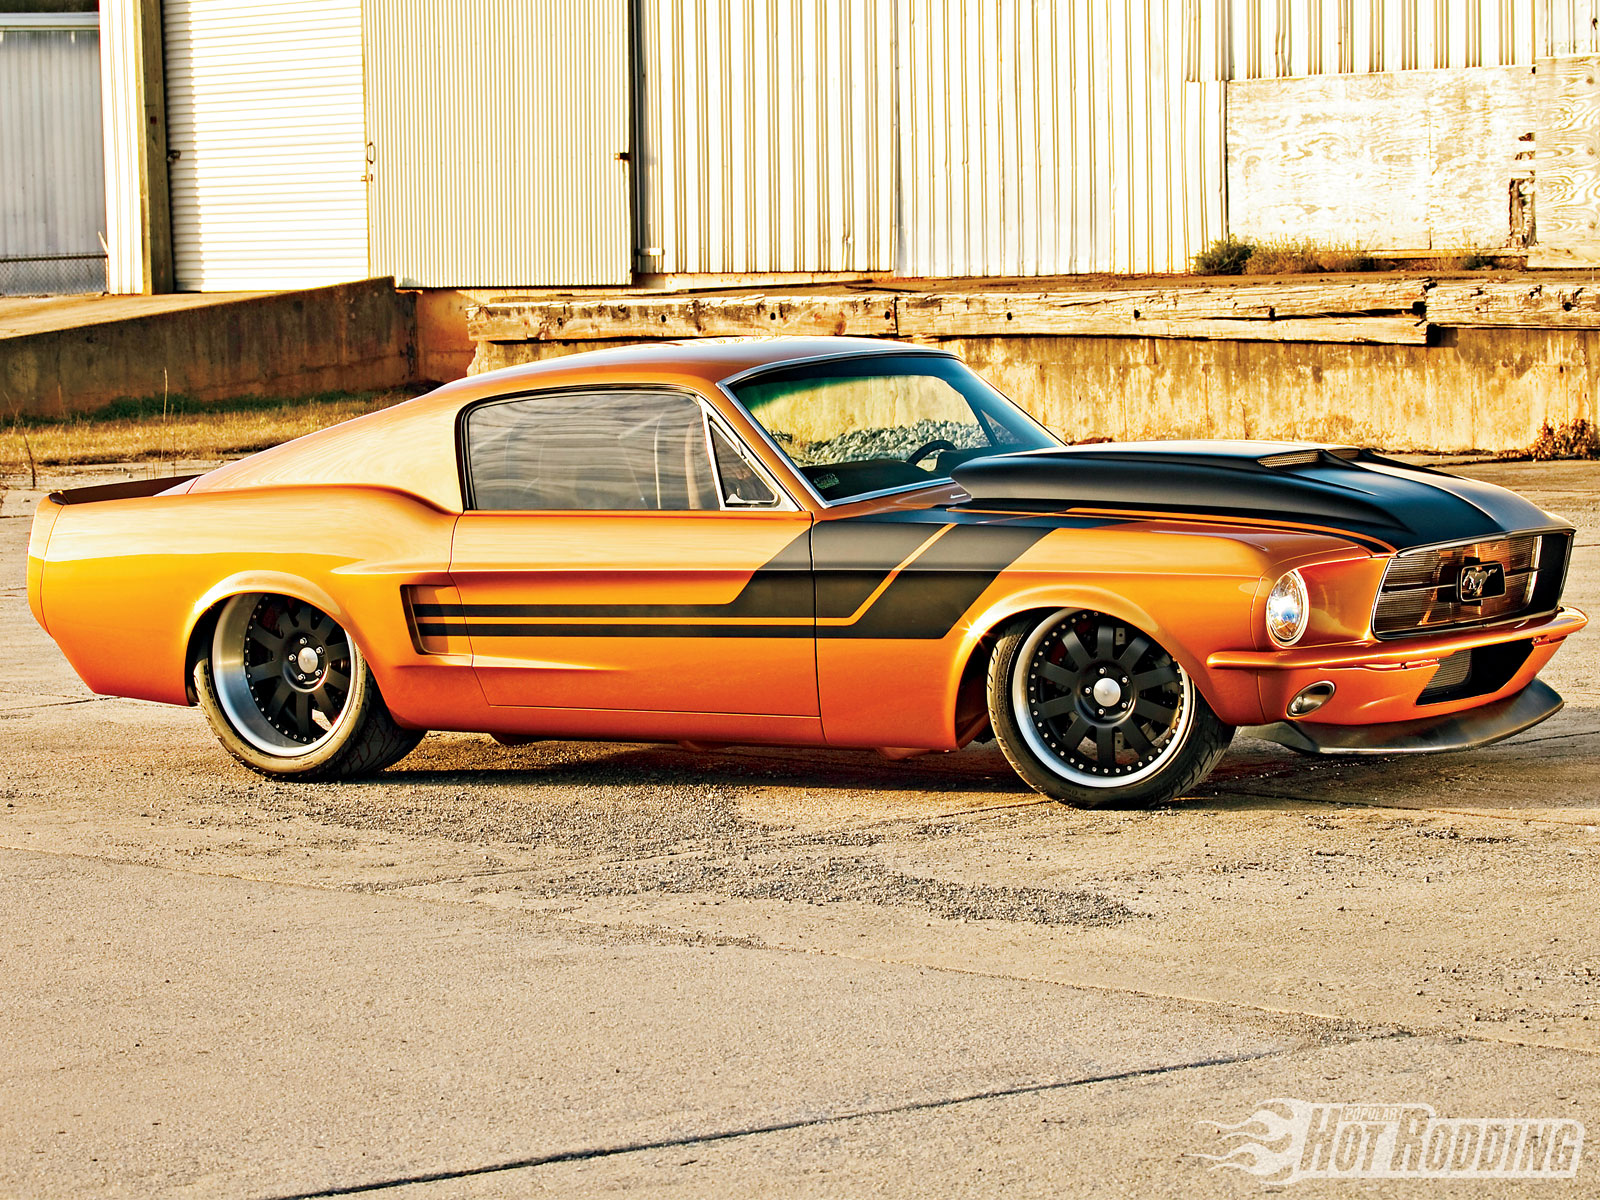 vehicles, ford mustang fastback, classic car, fastback, ford mustang, ford, hot rod, muscle car Full HD